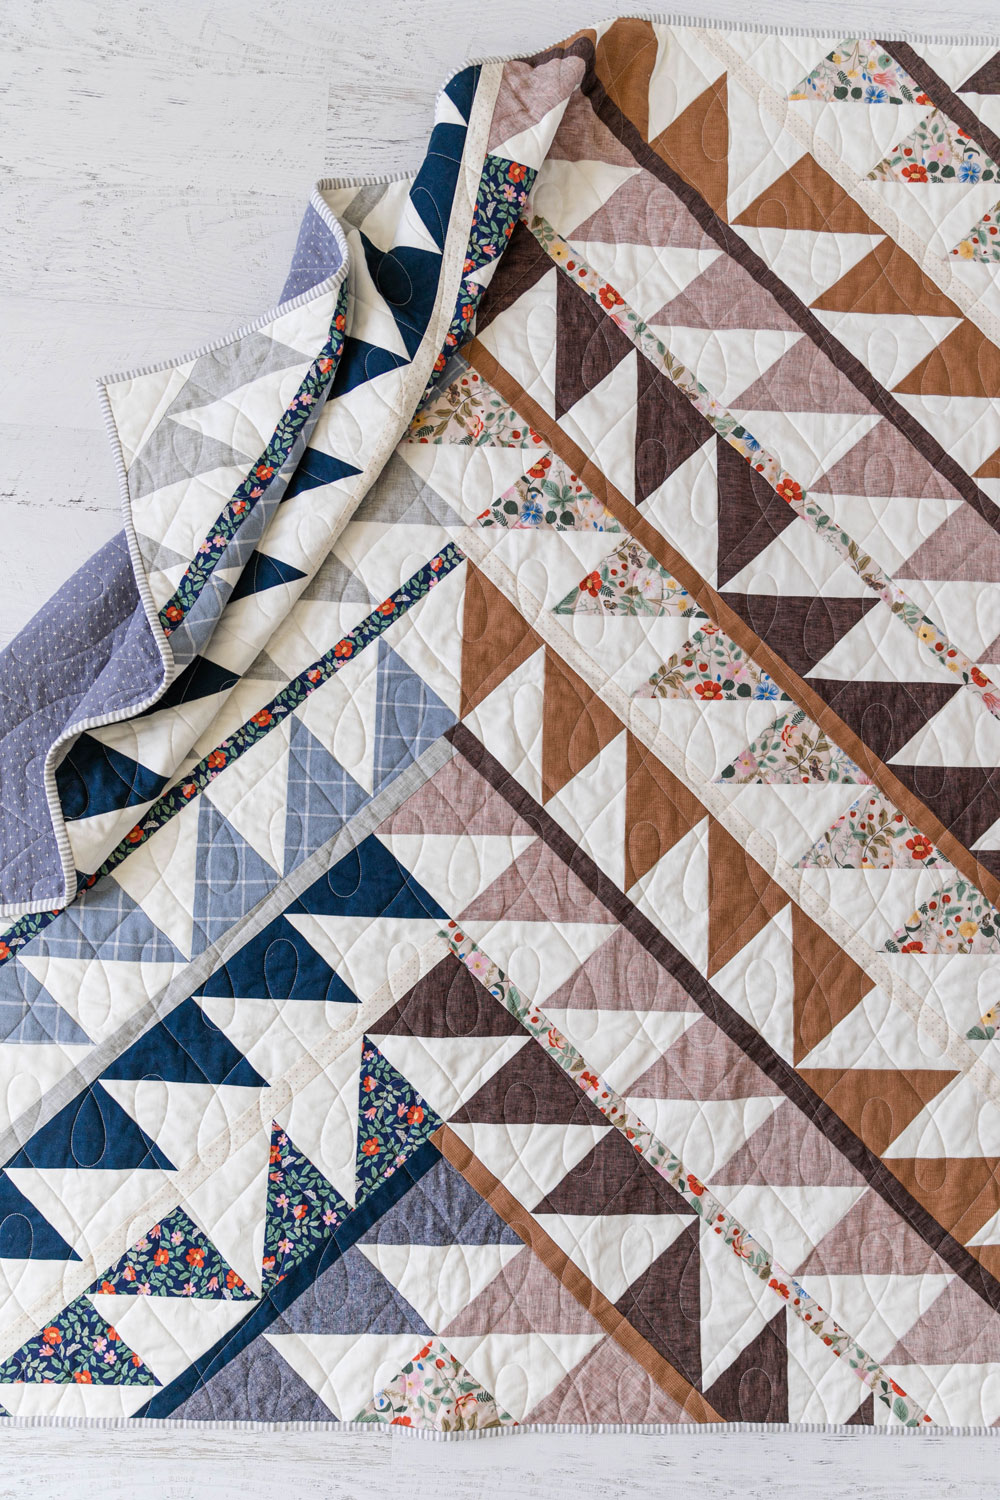 The Gather quilt sew along is an online quilting community experience! We will make this modern quilt pattern together – one week at a time. suzyquilts.com #quiltalong #modernquiltpattern